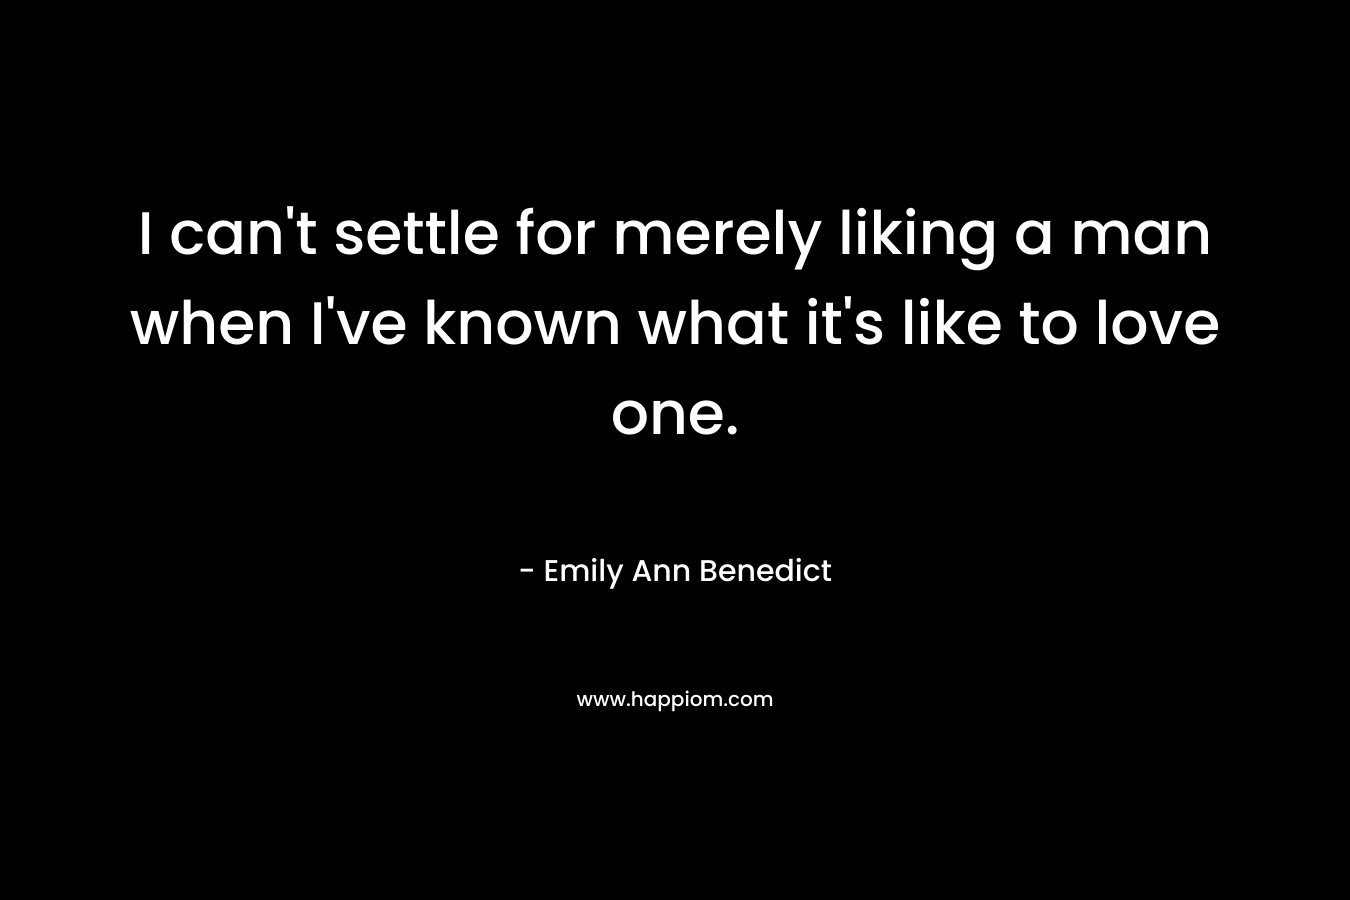 I can’t settle for merely liking a man when I’ve known what it’s like to love one. – Emily Ann Benedict